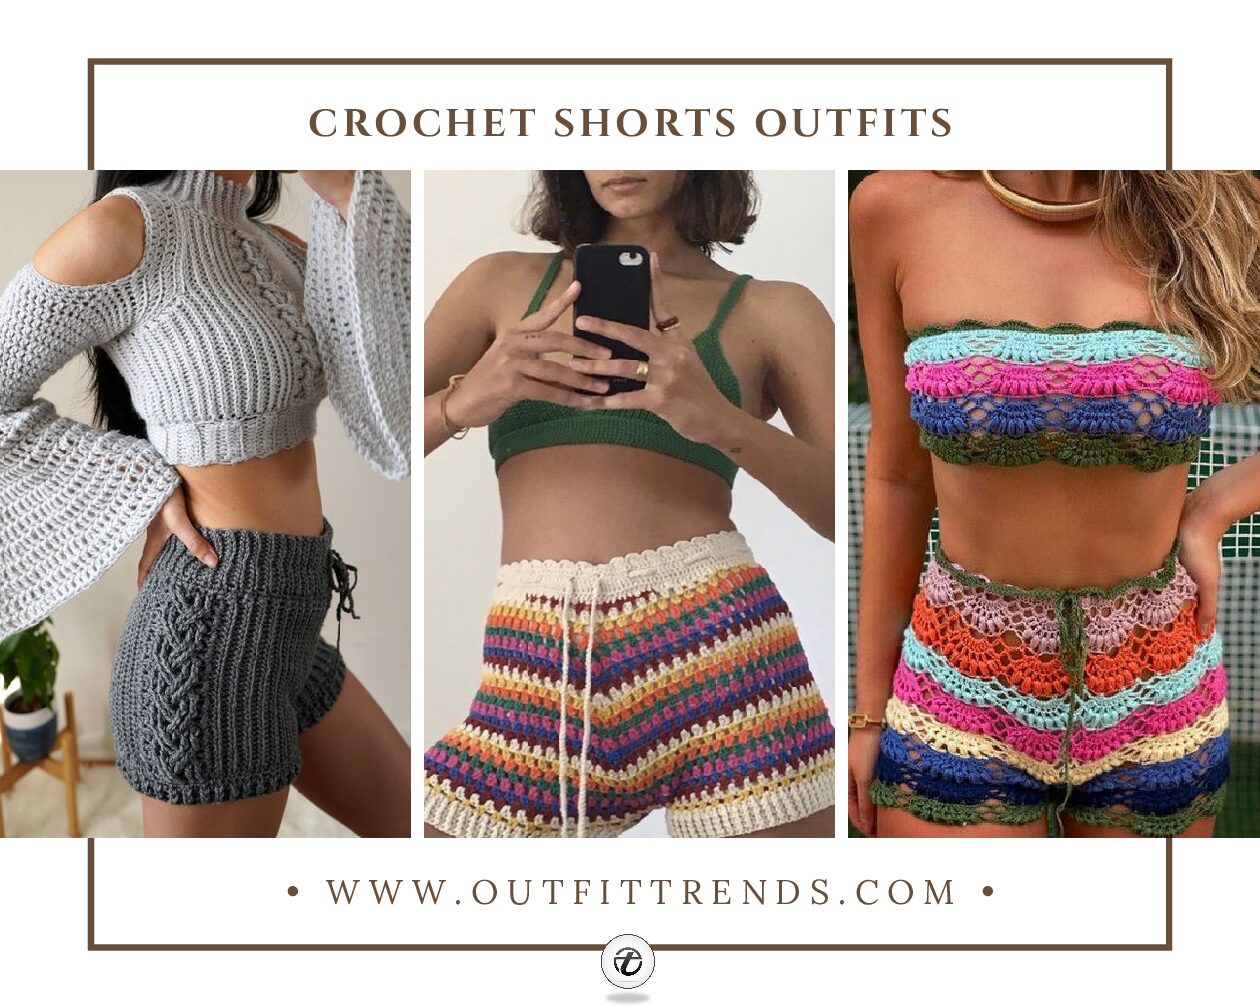 How to Wear Crochet Shorts Outfits 19 Styling Ideas